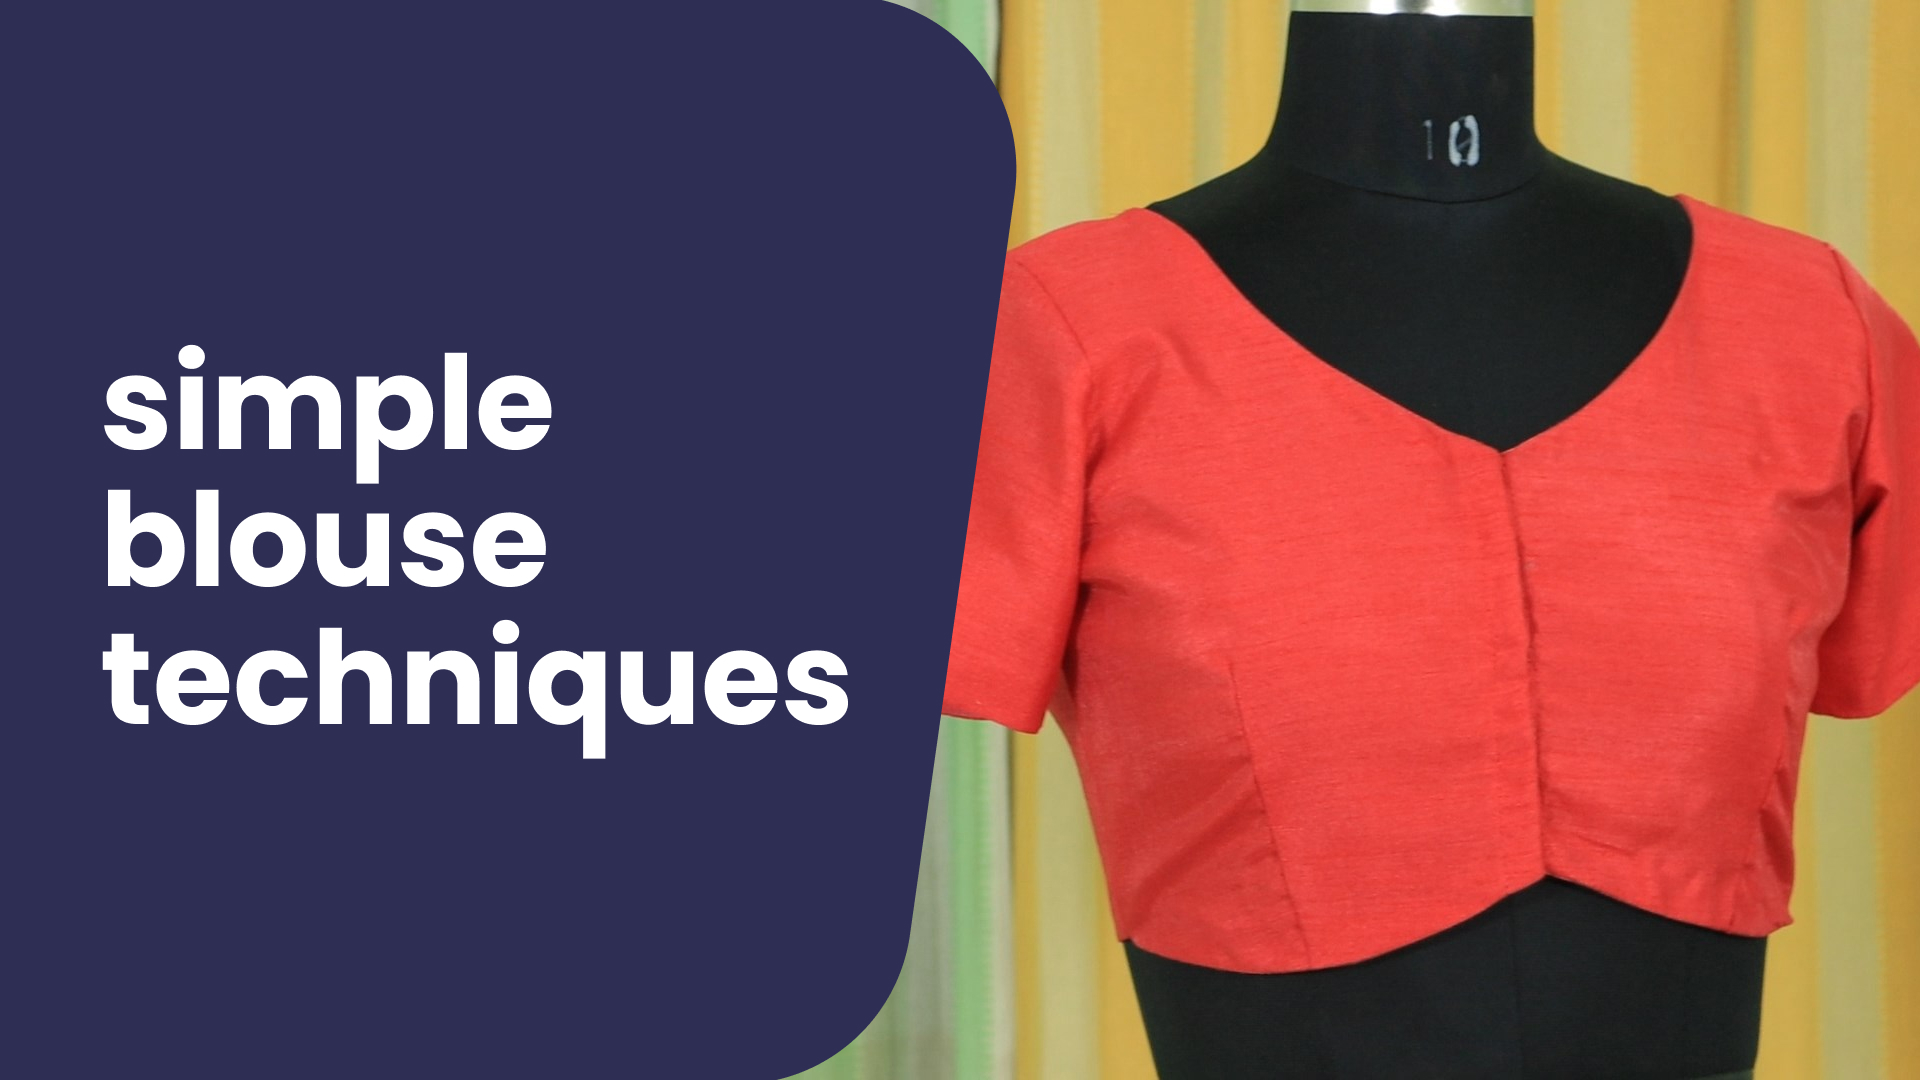 Course Trailer: How to Stitch a Basic Blouse. Watch to know more.